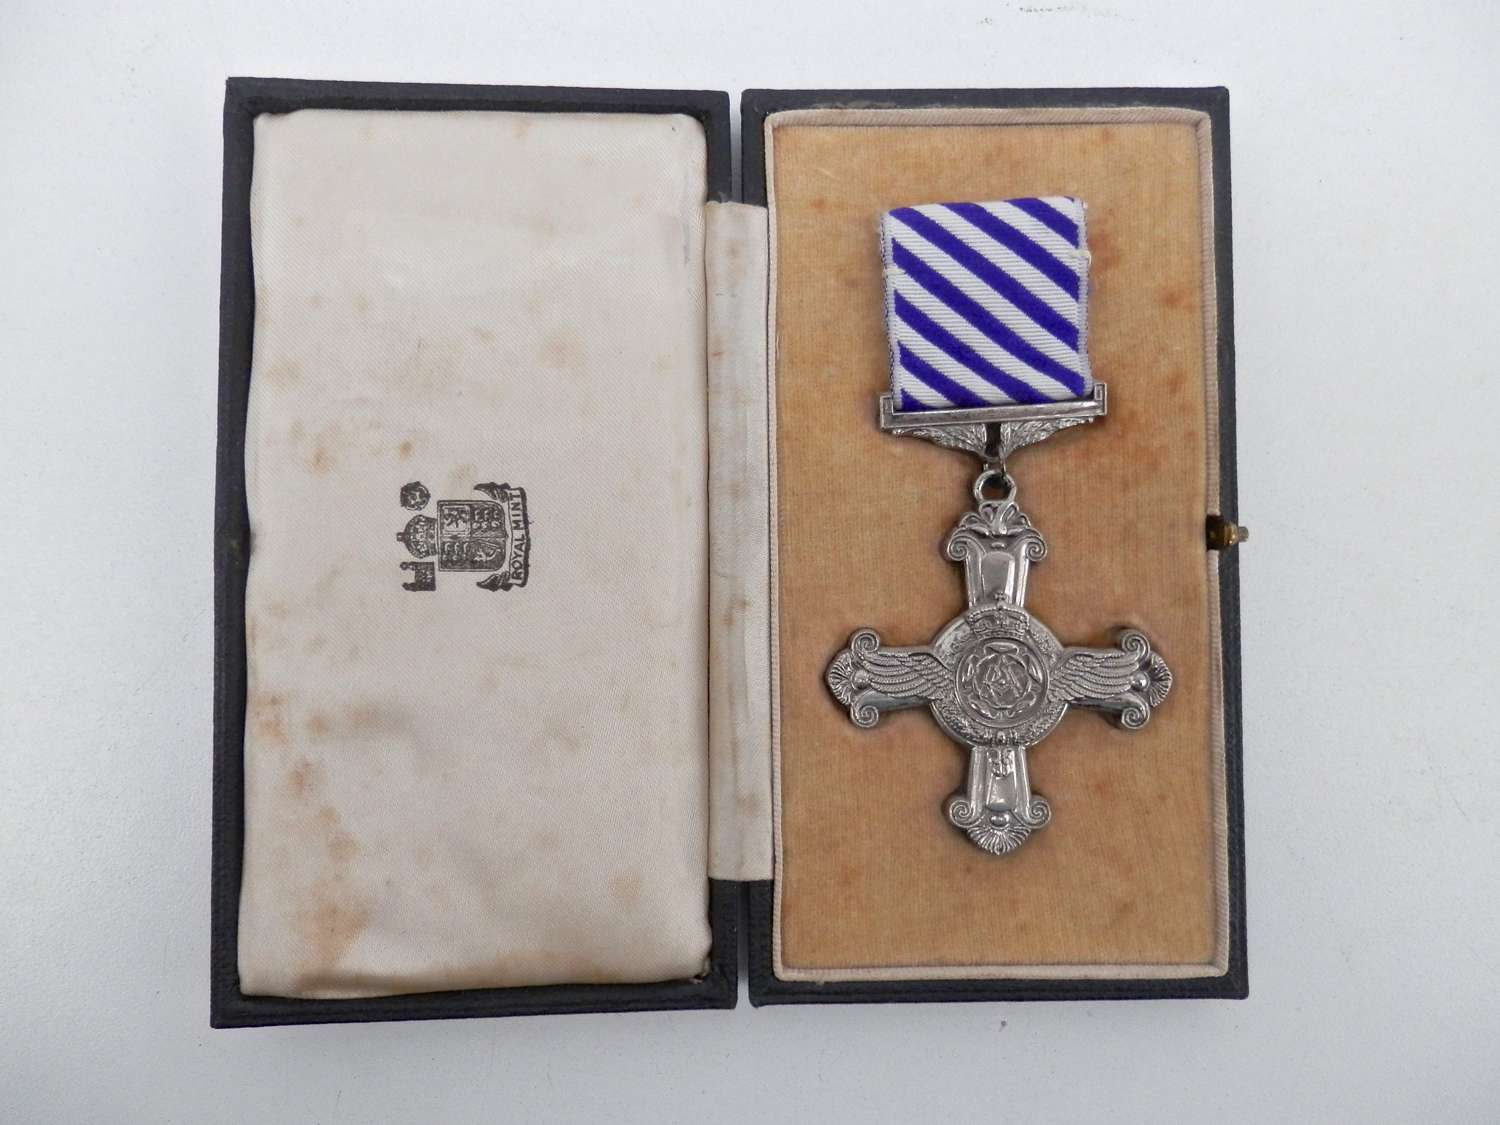 RAF dfc medal box and medal